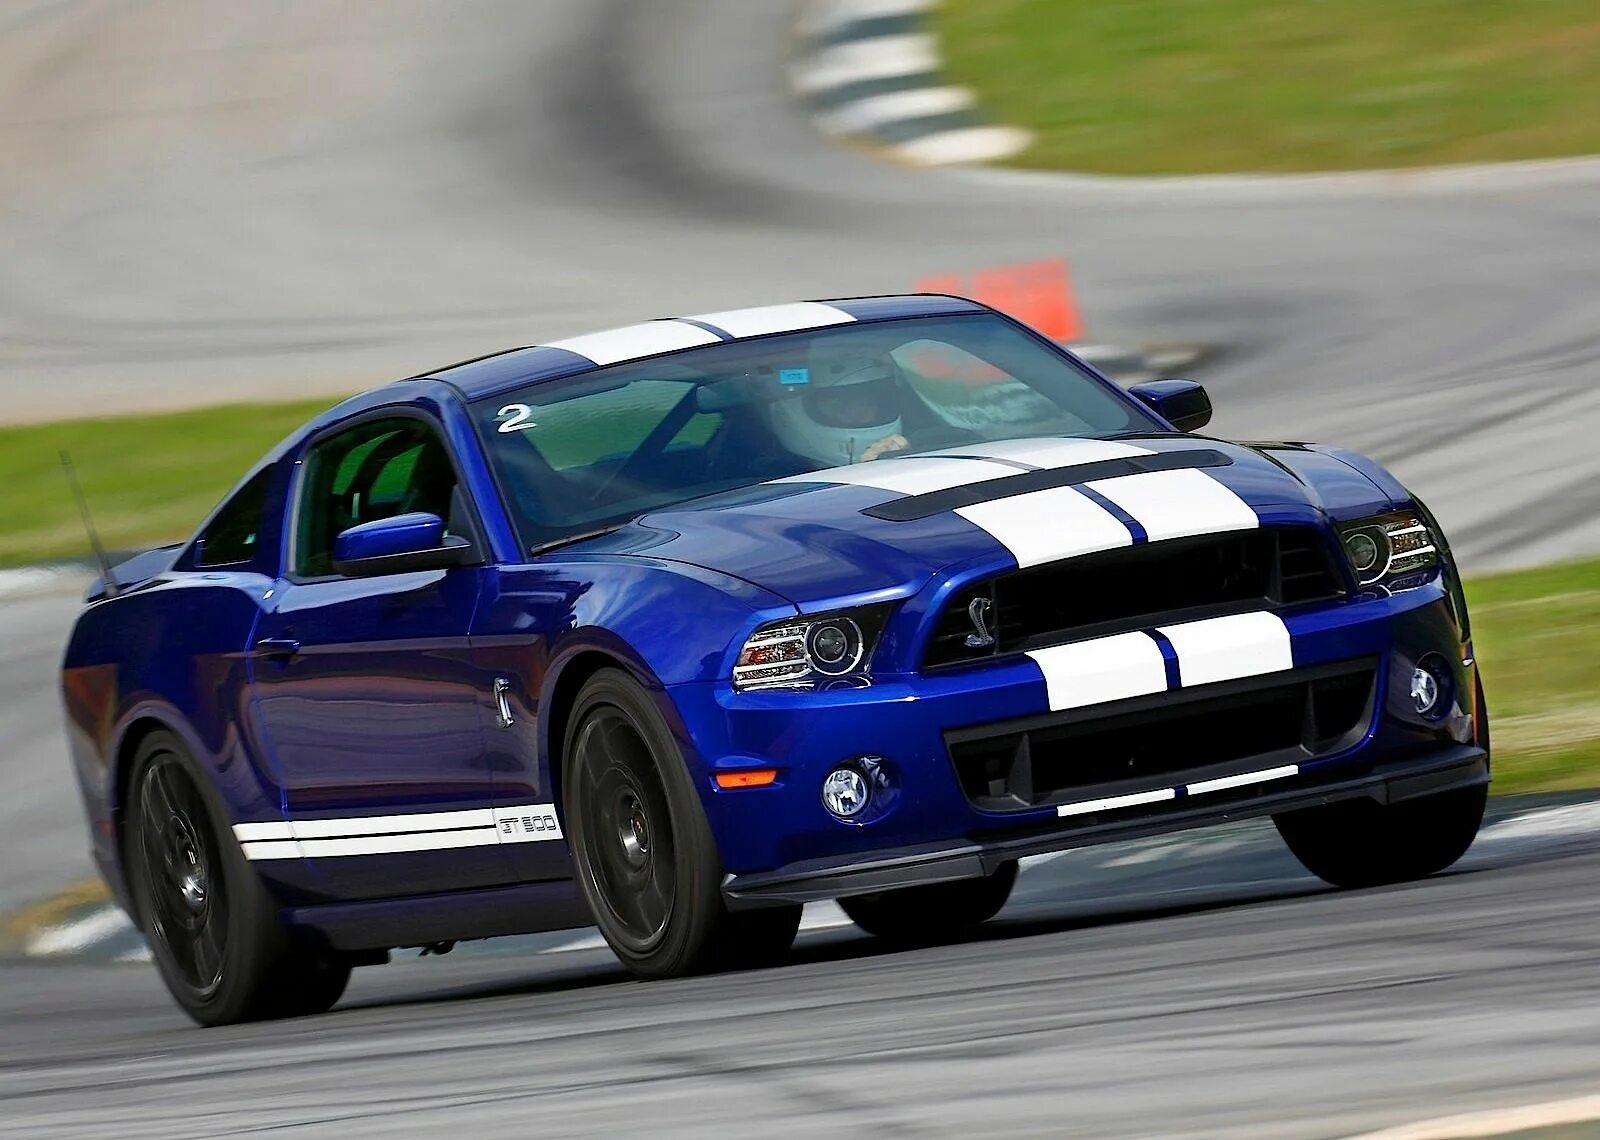 Mustang shelby gt 500. Форд Мустанг gt 500 Shelby. Ford Shelby gt500. Ford Mustang gt500. Ford Mustang Shelby gt500 2011.